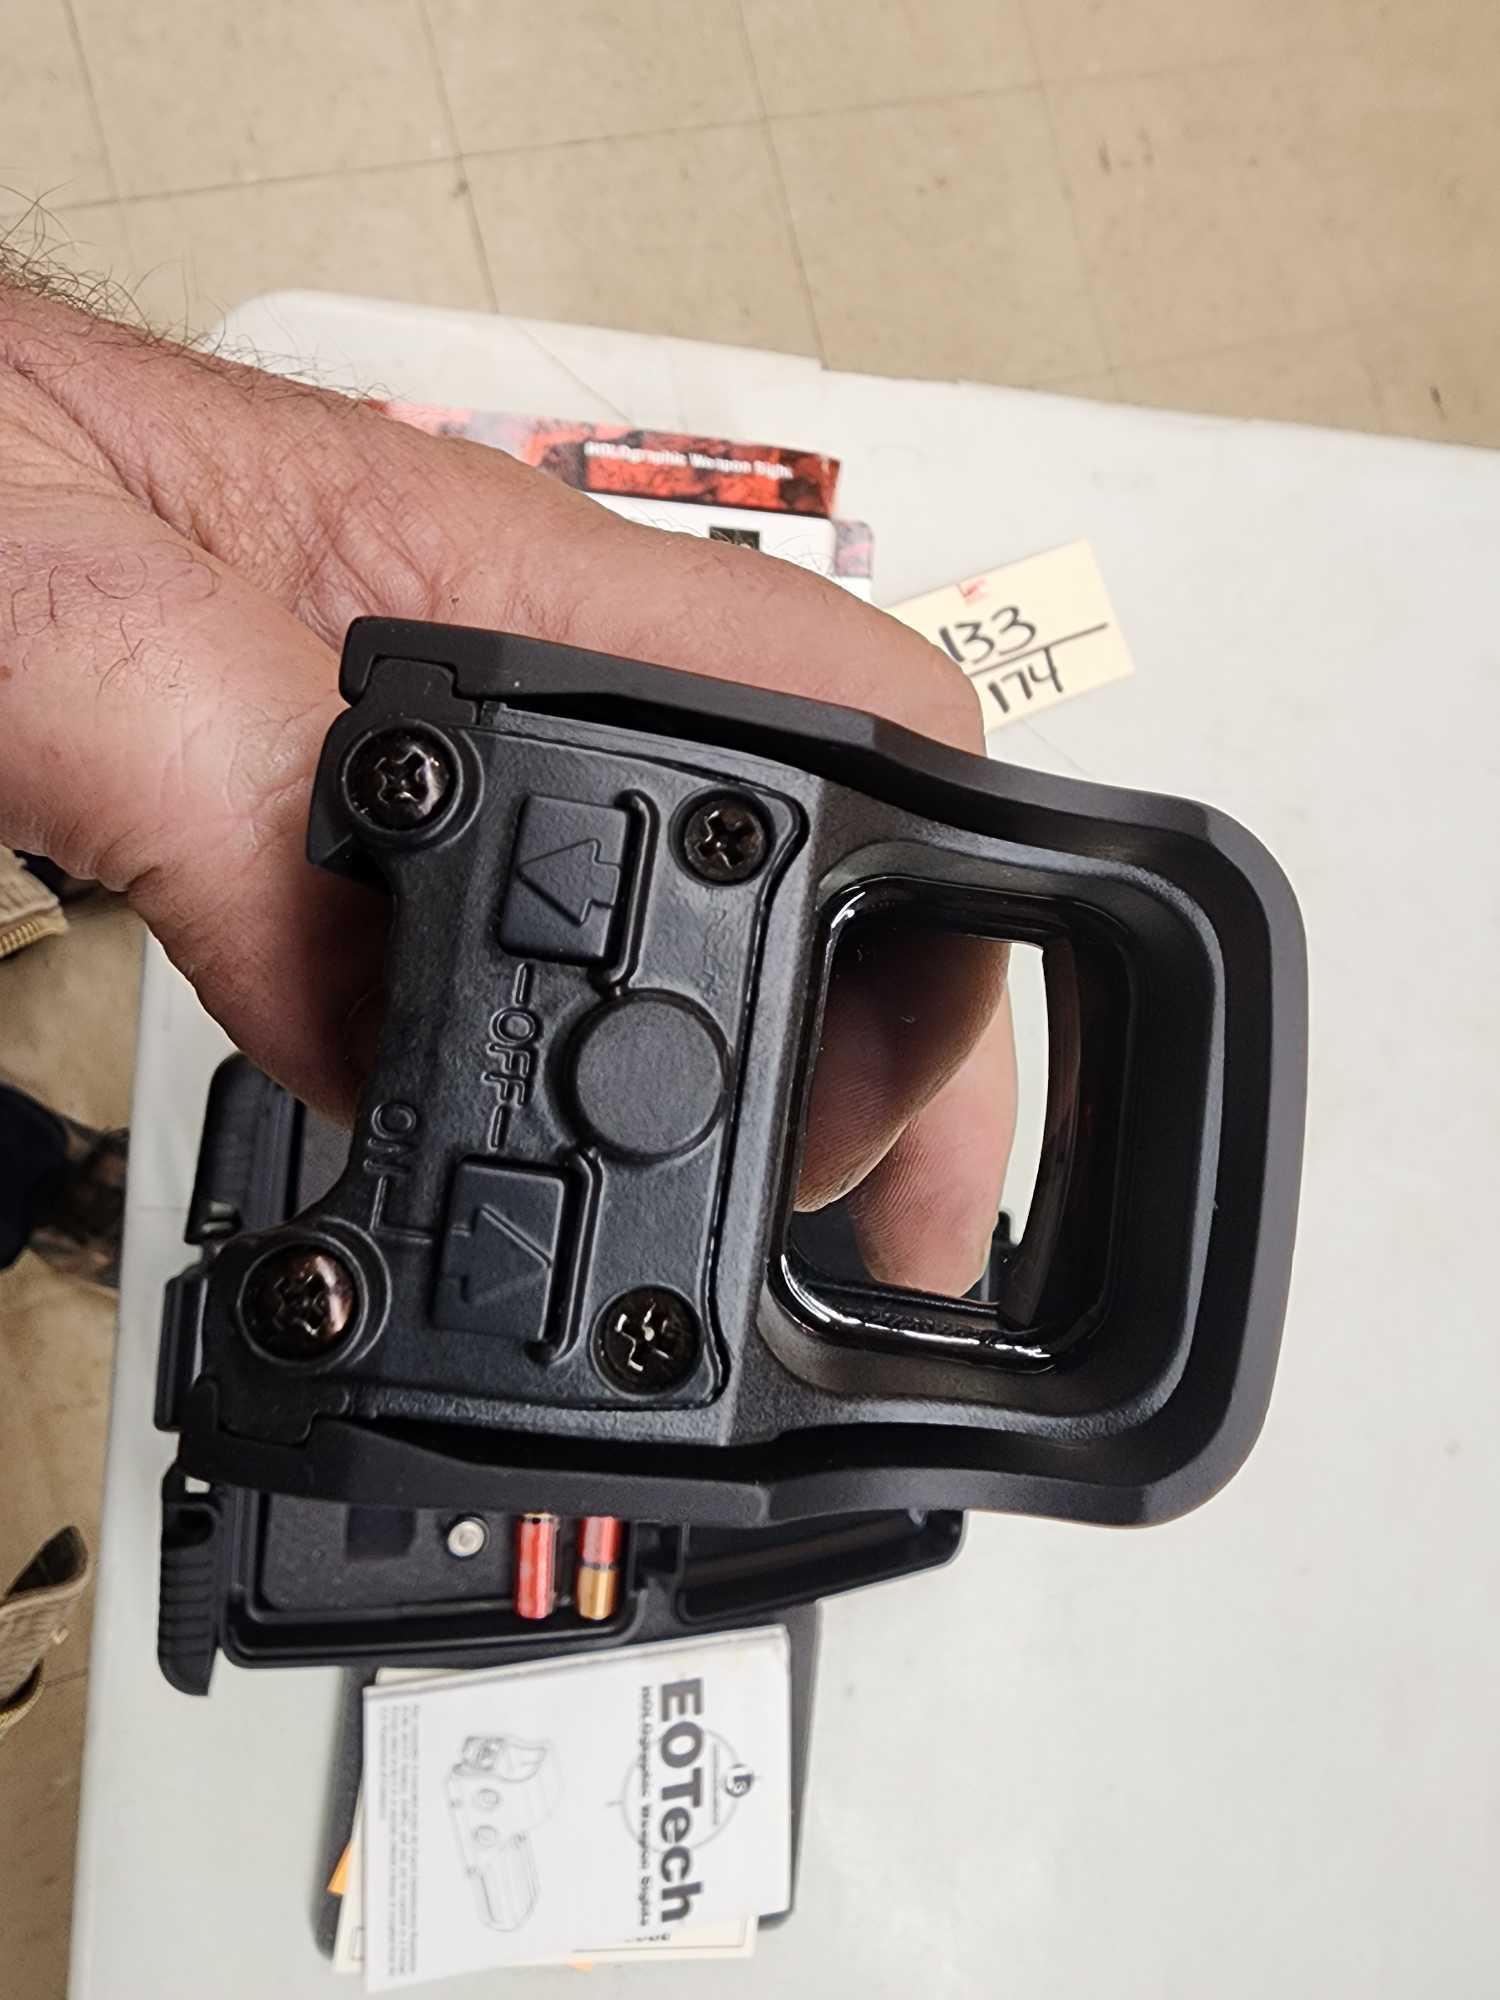 EO Tech L3 Holographic Weapon Sight